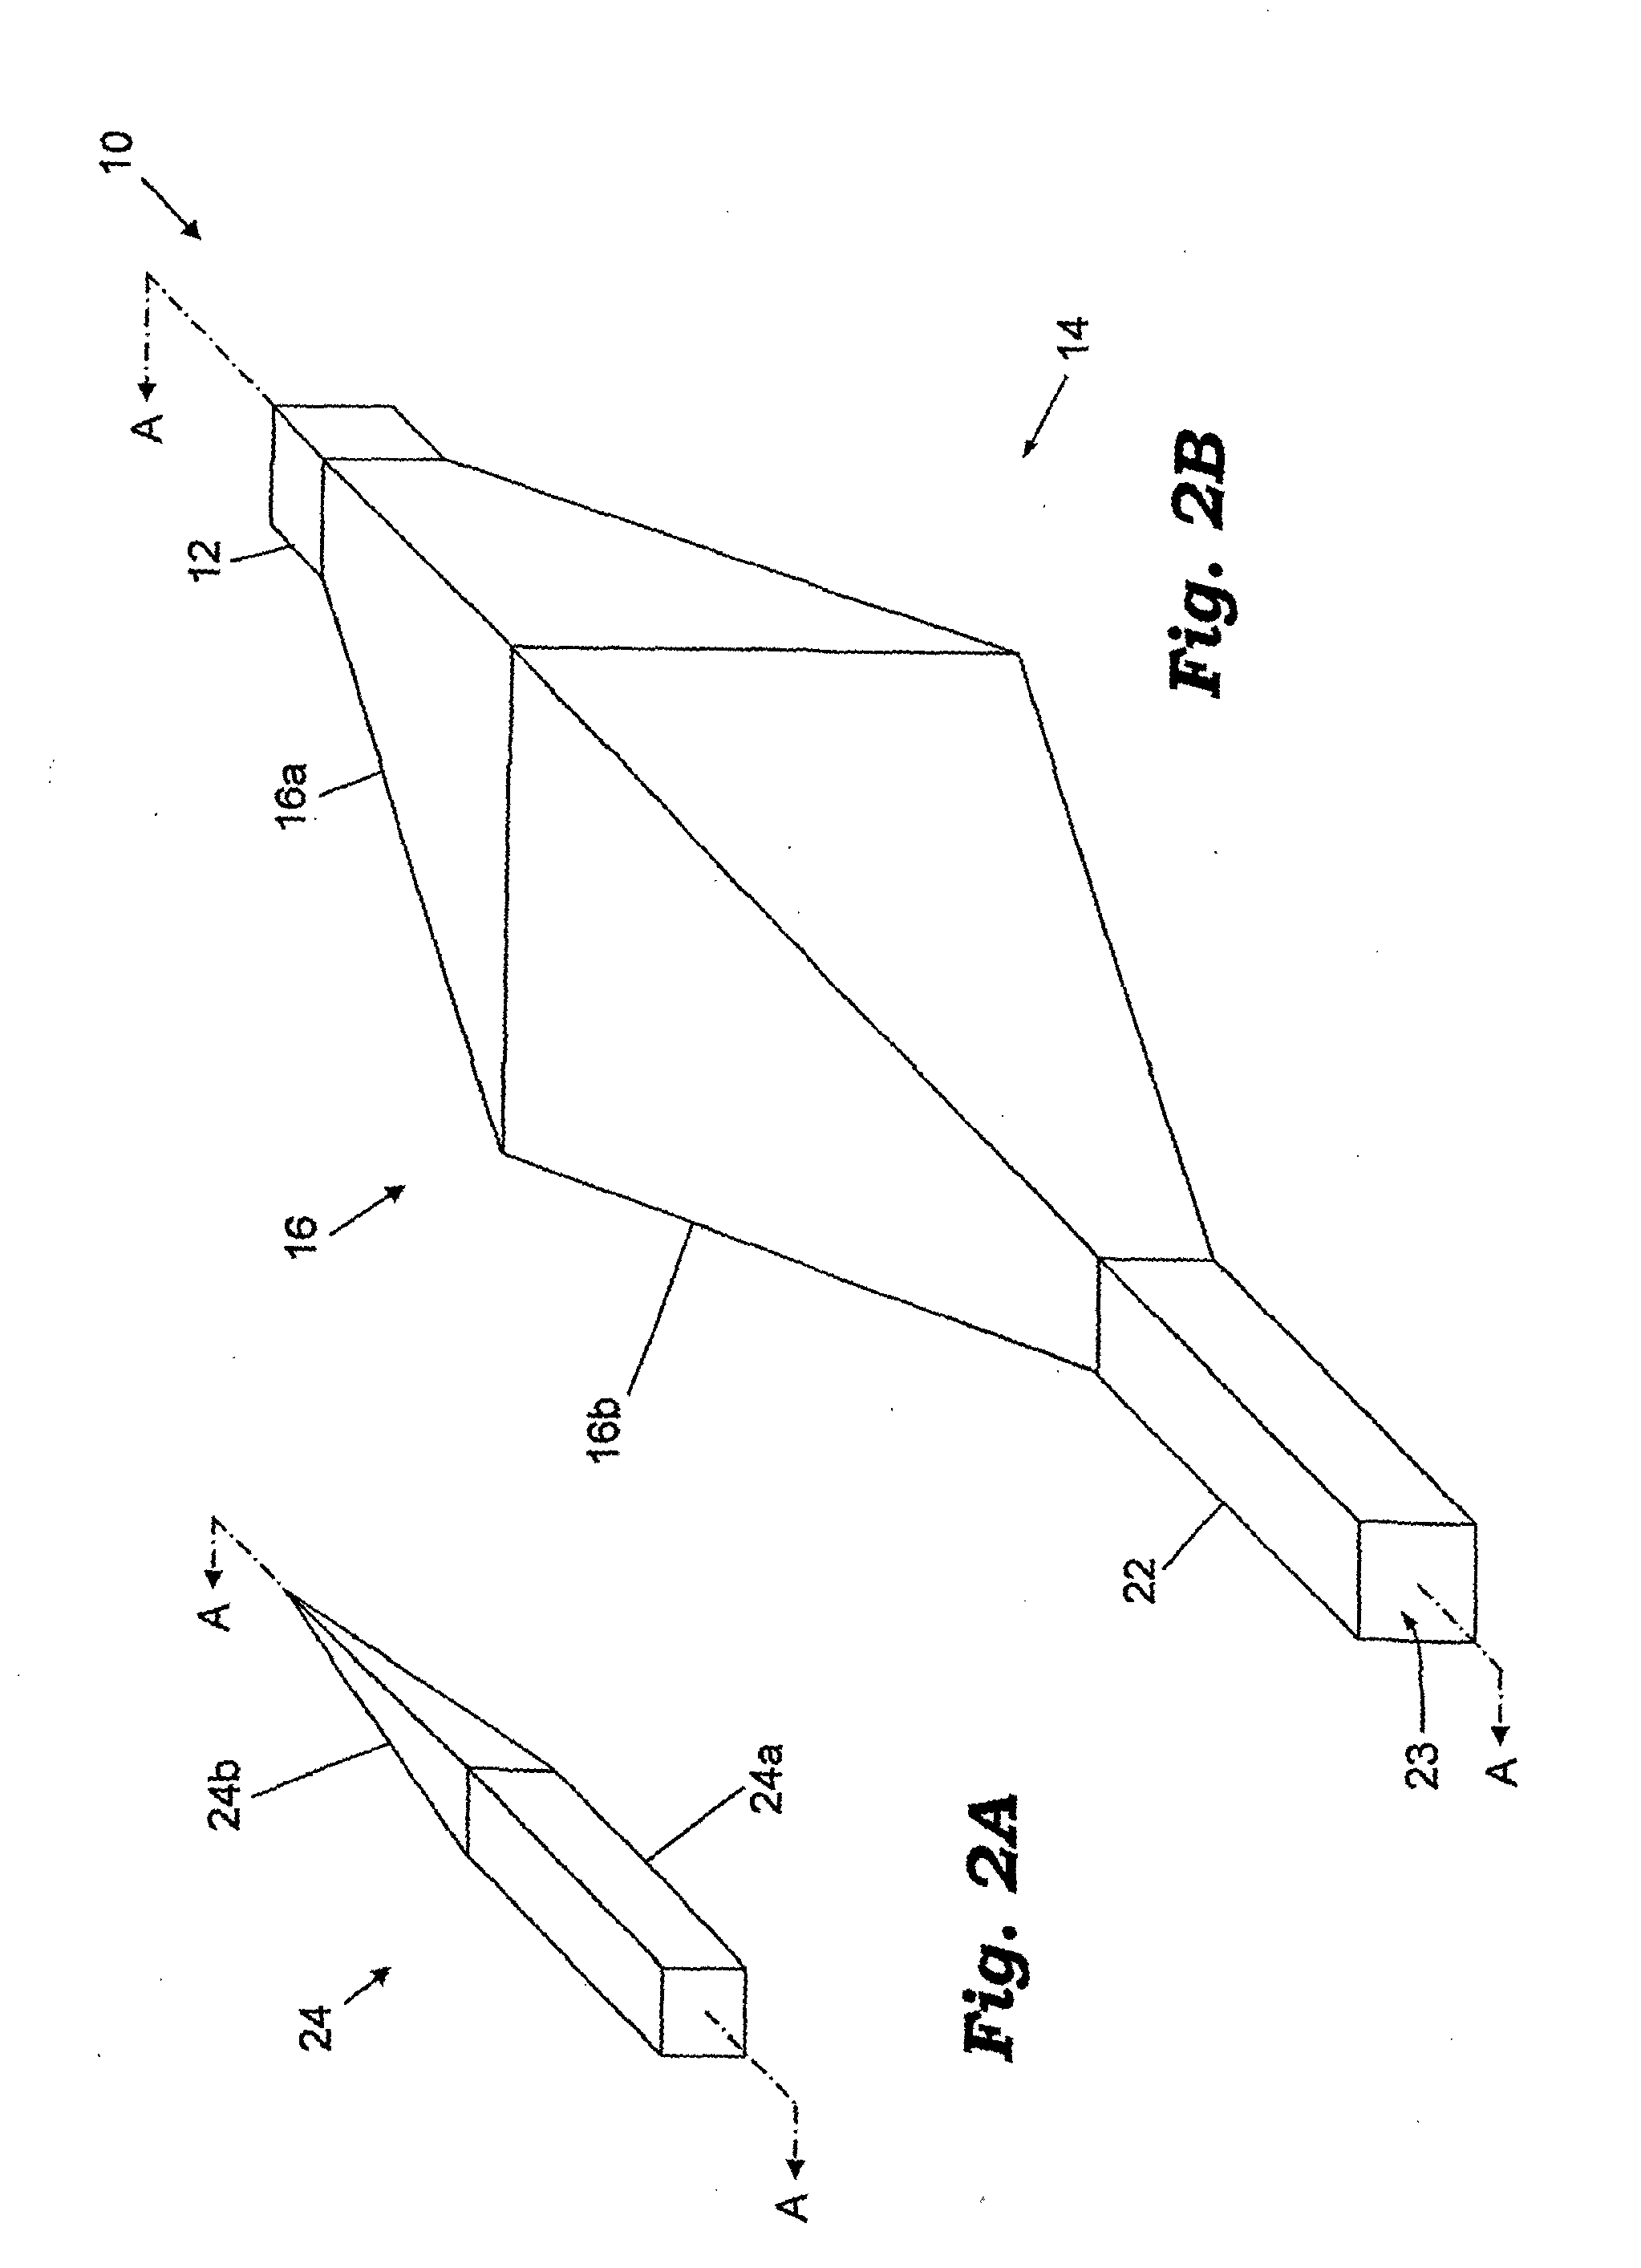 System And Method For Projection of Subsurface Structure Onto An Object's Surface